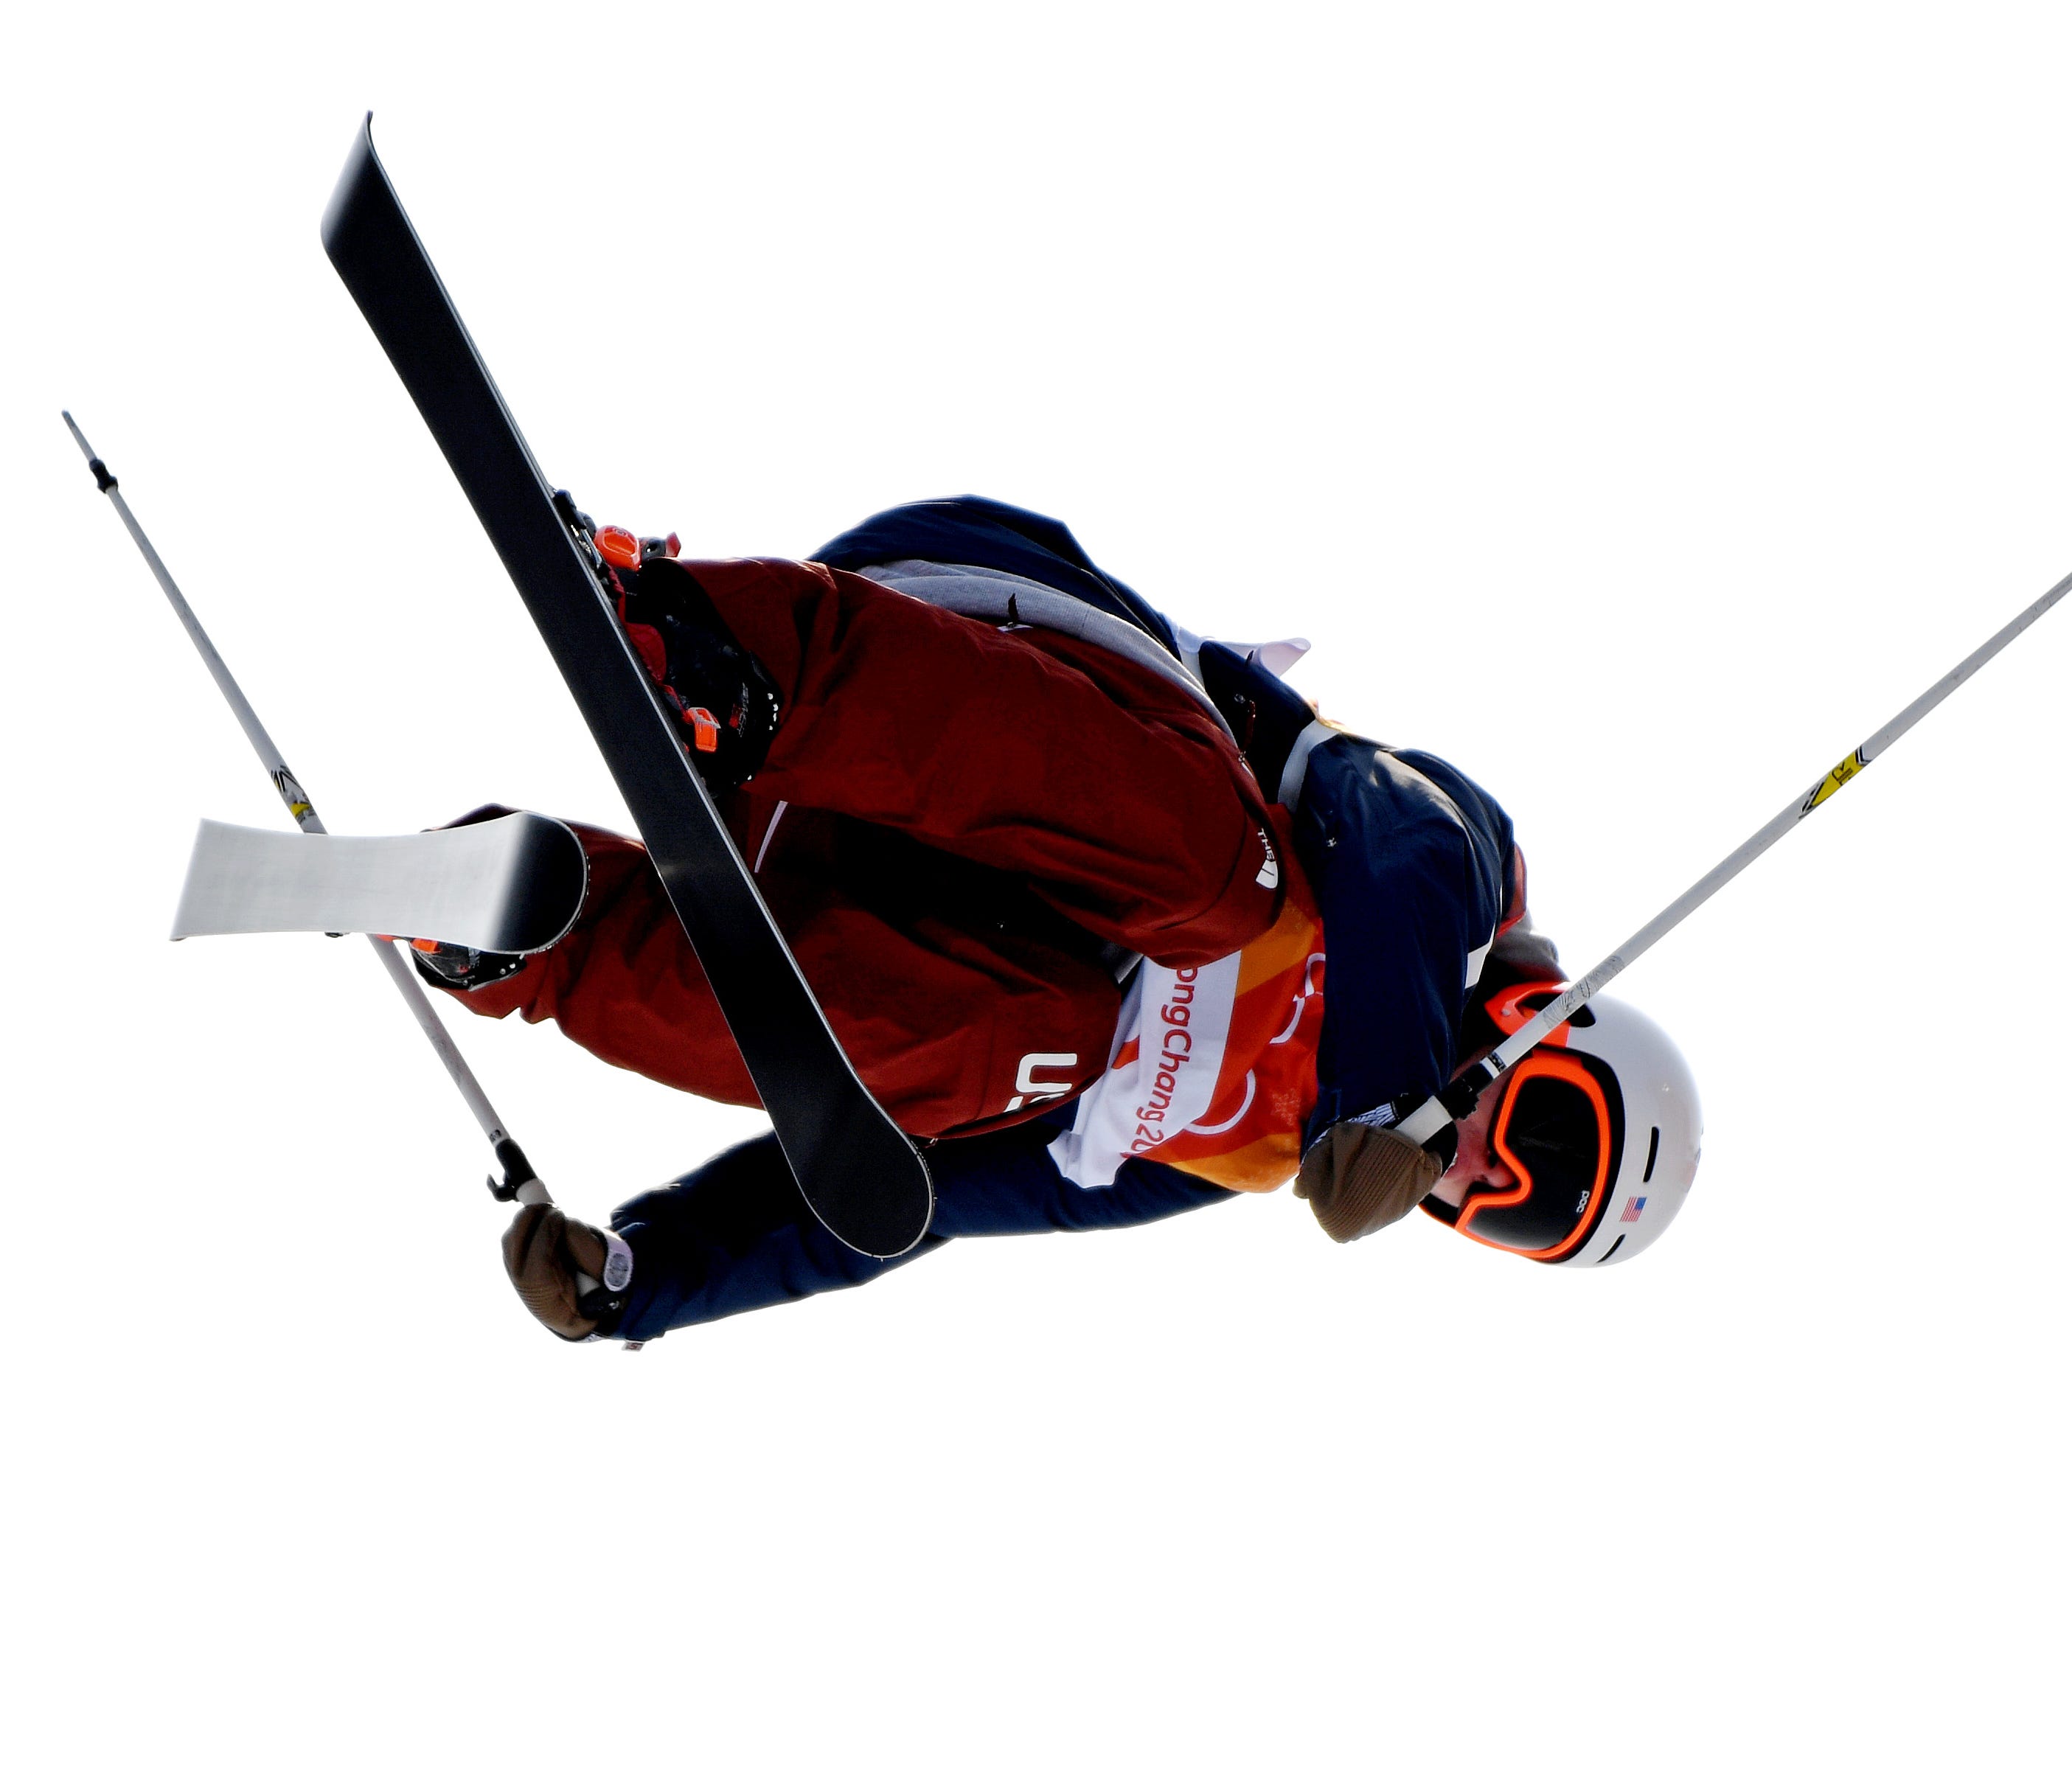 Aaron Blunck competes in the men's freestyle skiing halfpipe qualification during the Pyeongchang 2018 Olympic Winter Games at Phoenix Snow Park on Feb. 20.